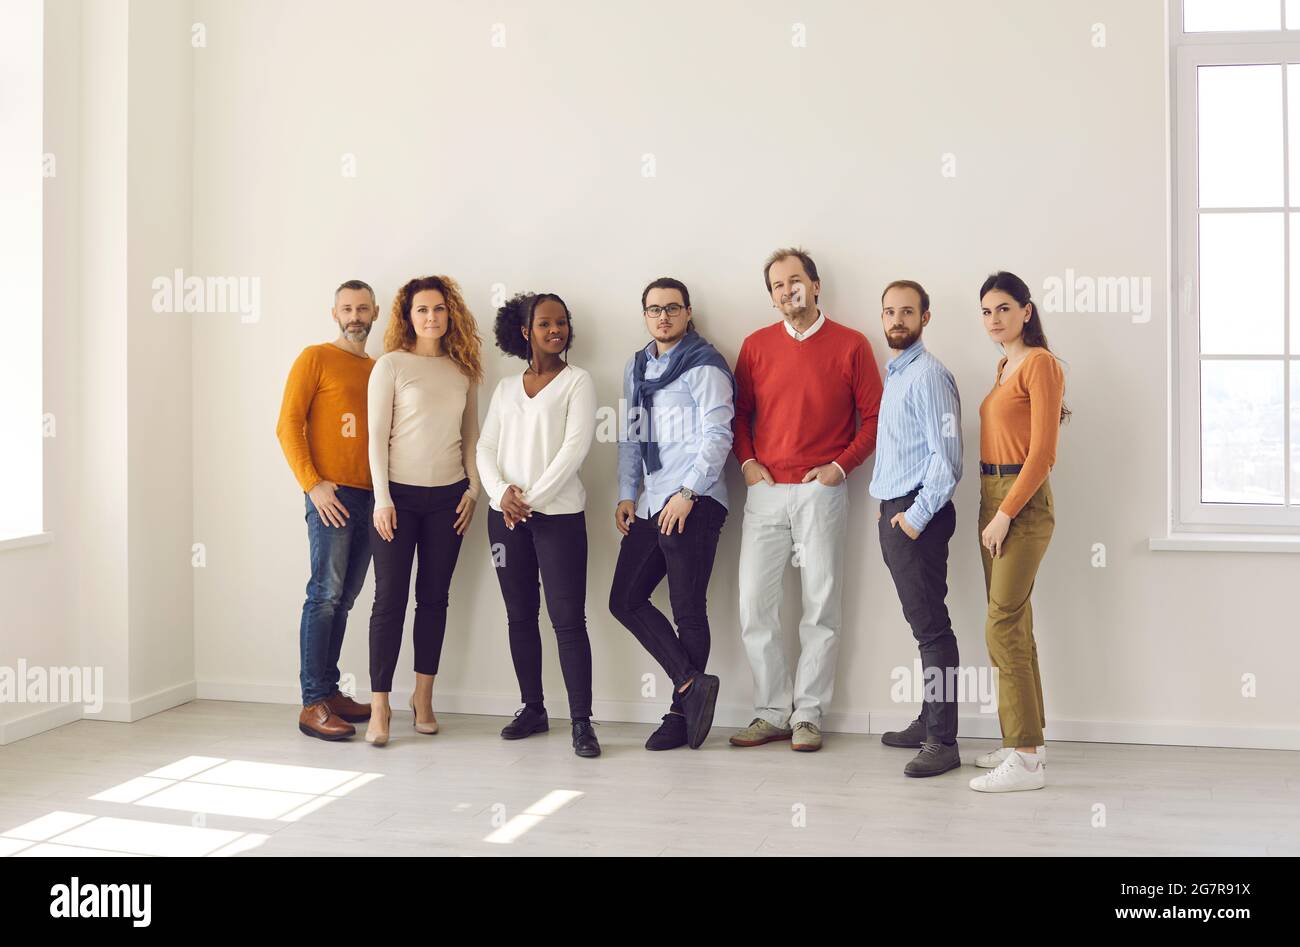 Group of diverse people in casual wear standing together in empty office or studio Stock Photo